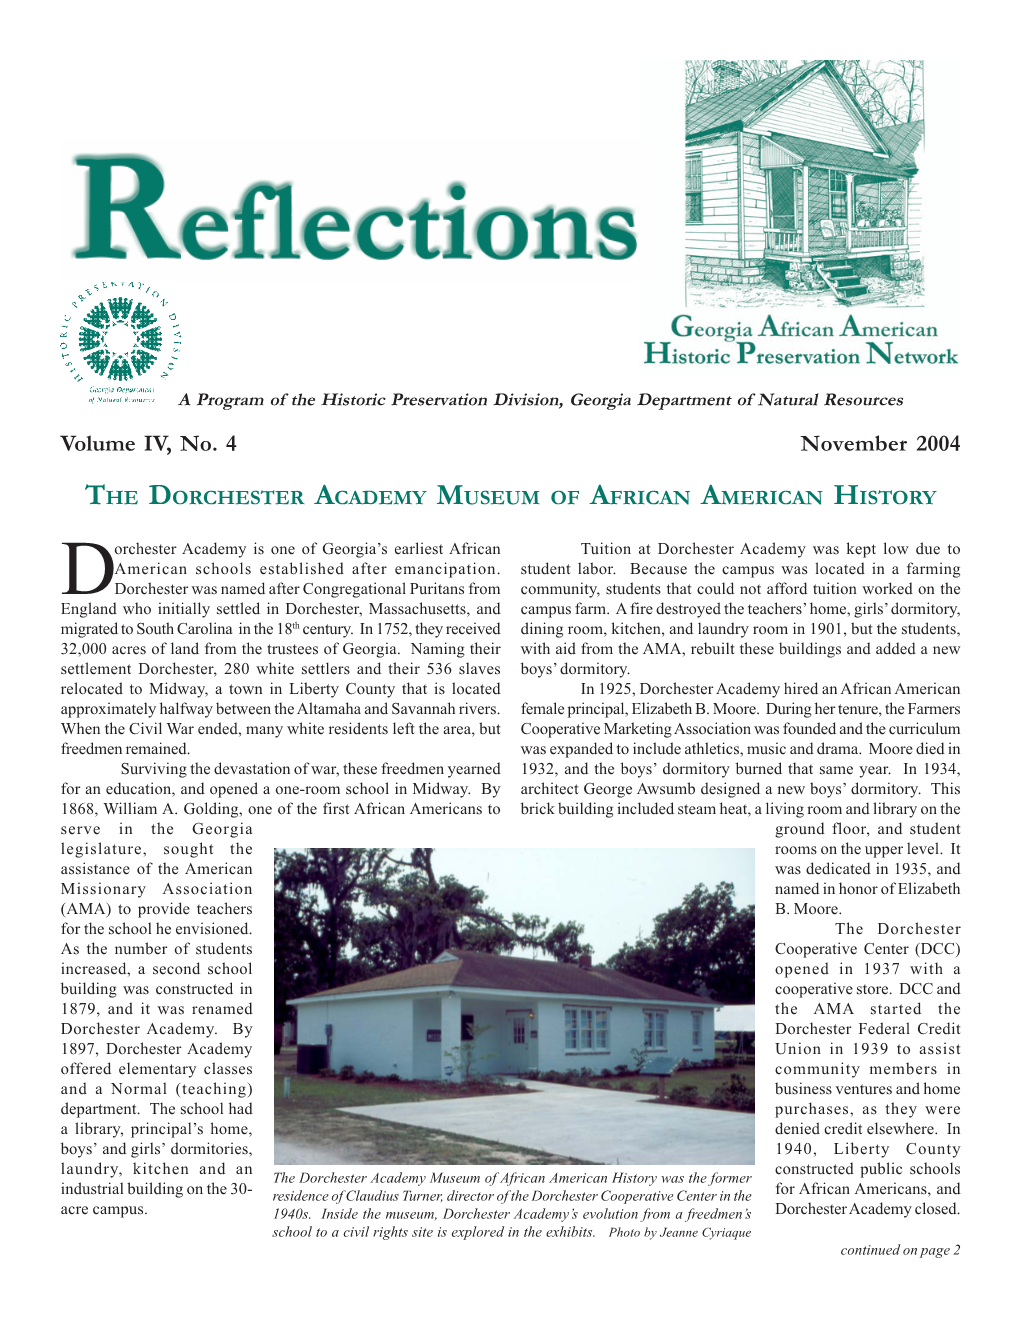 The Dorchester Academy Museum of African American History